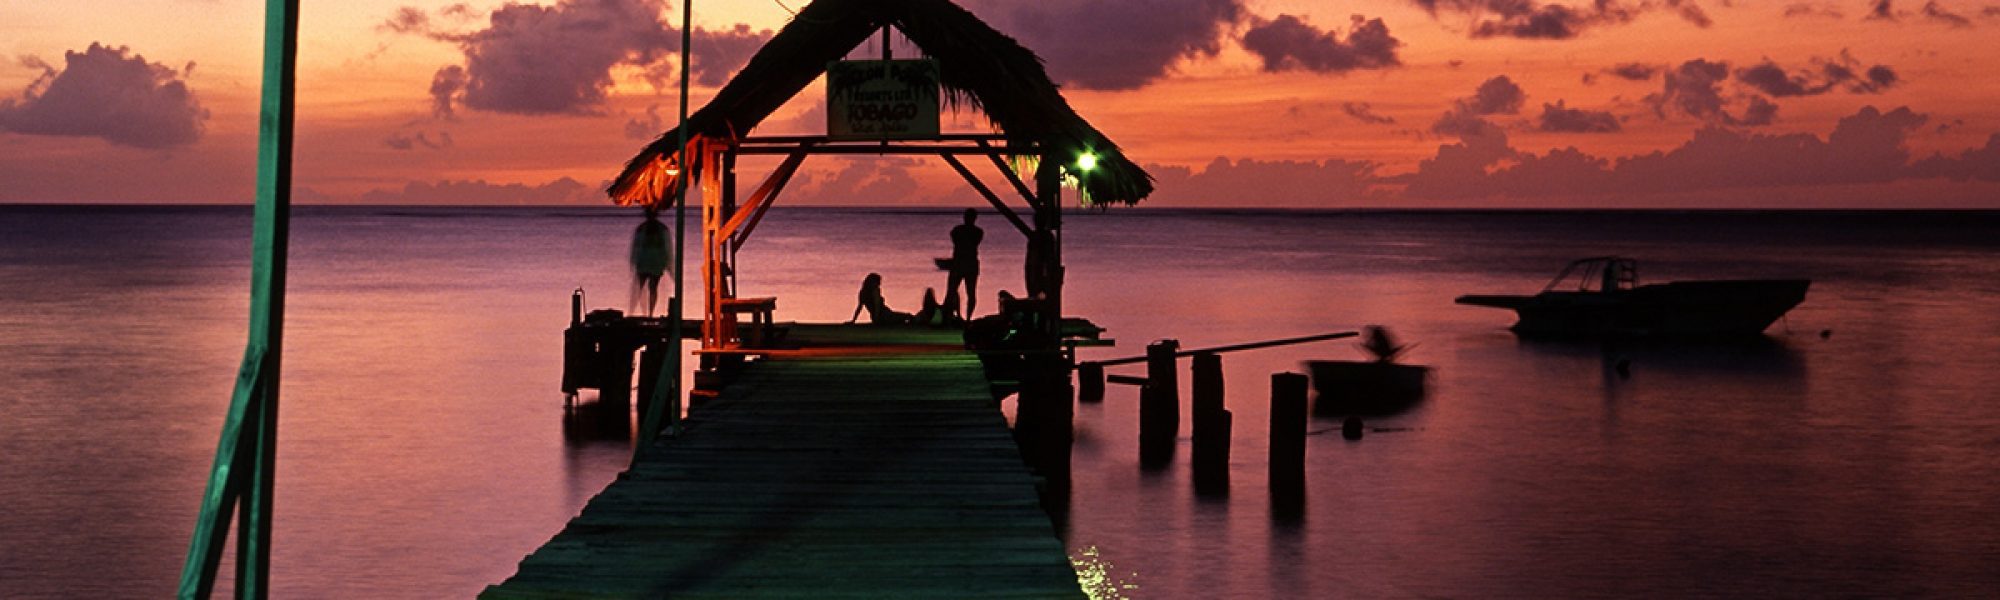 The jetty at Pigeon Point at sunset, Tobago